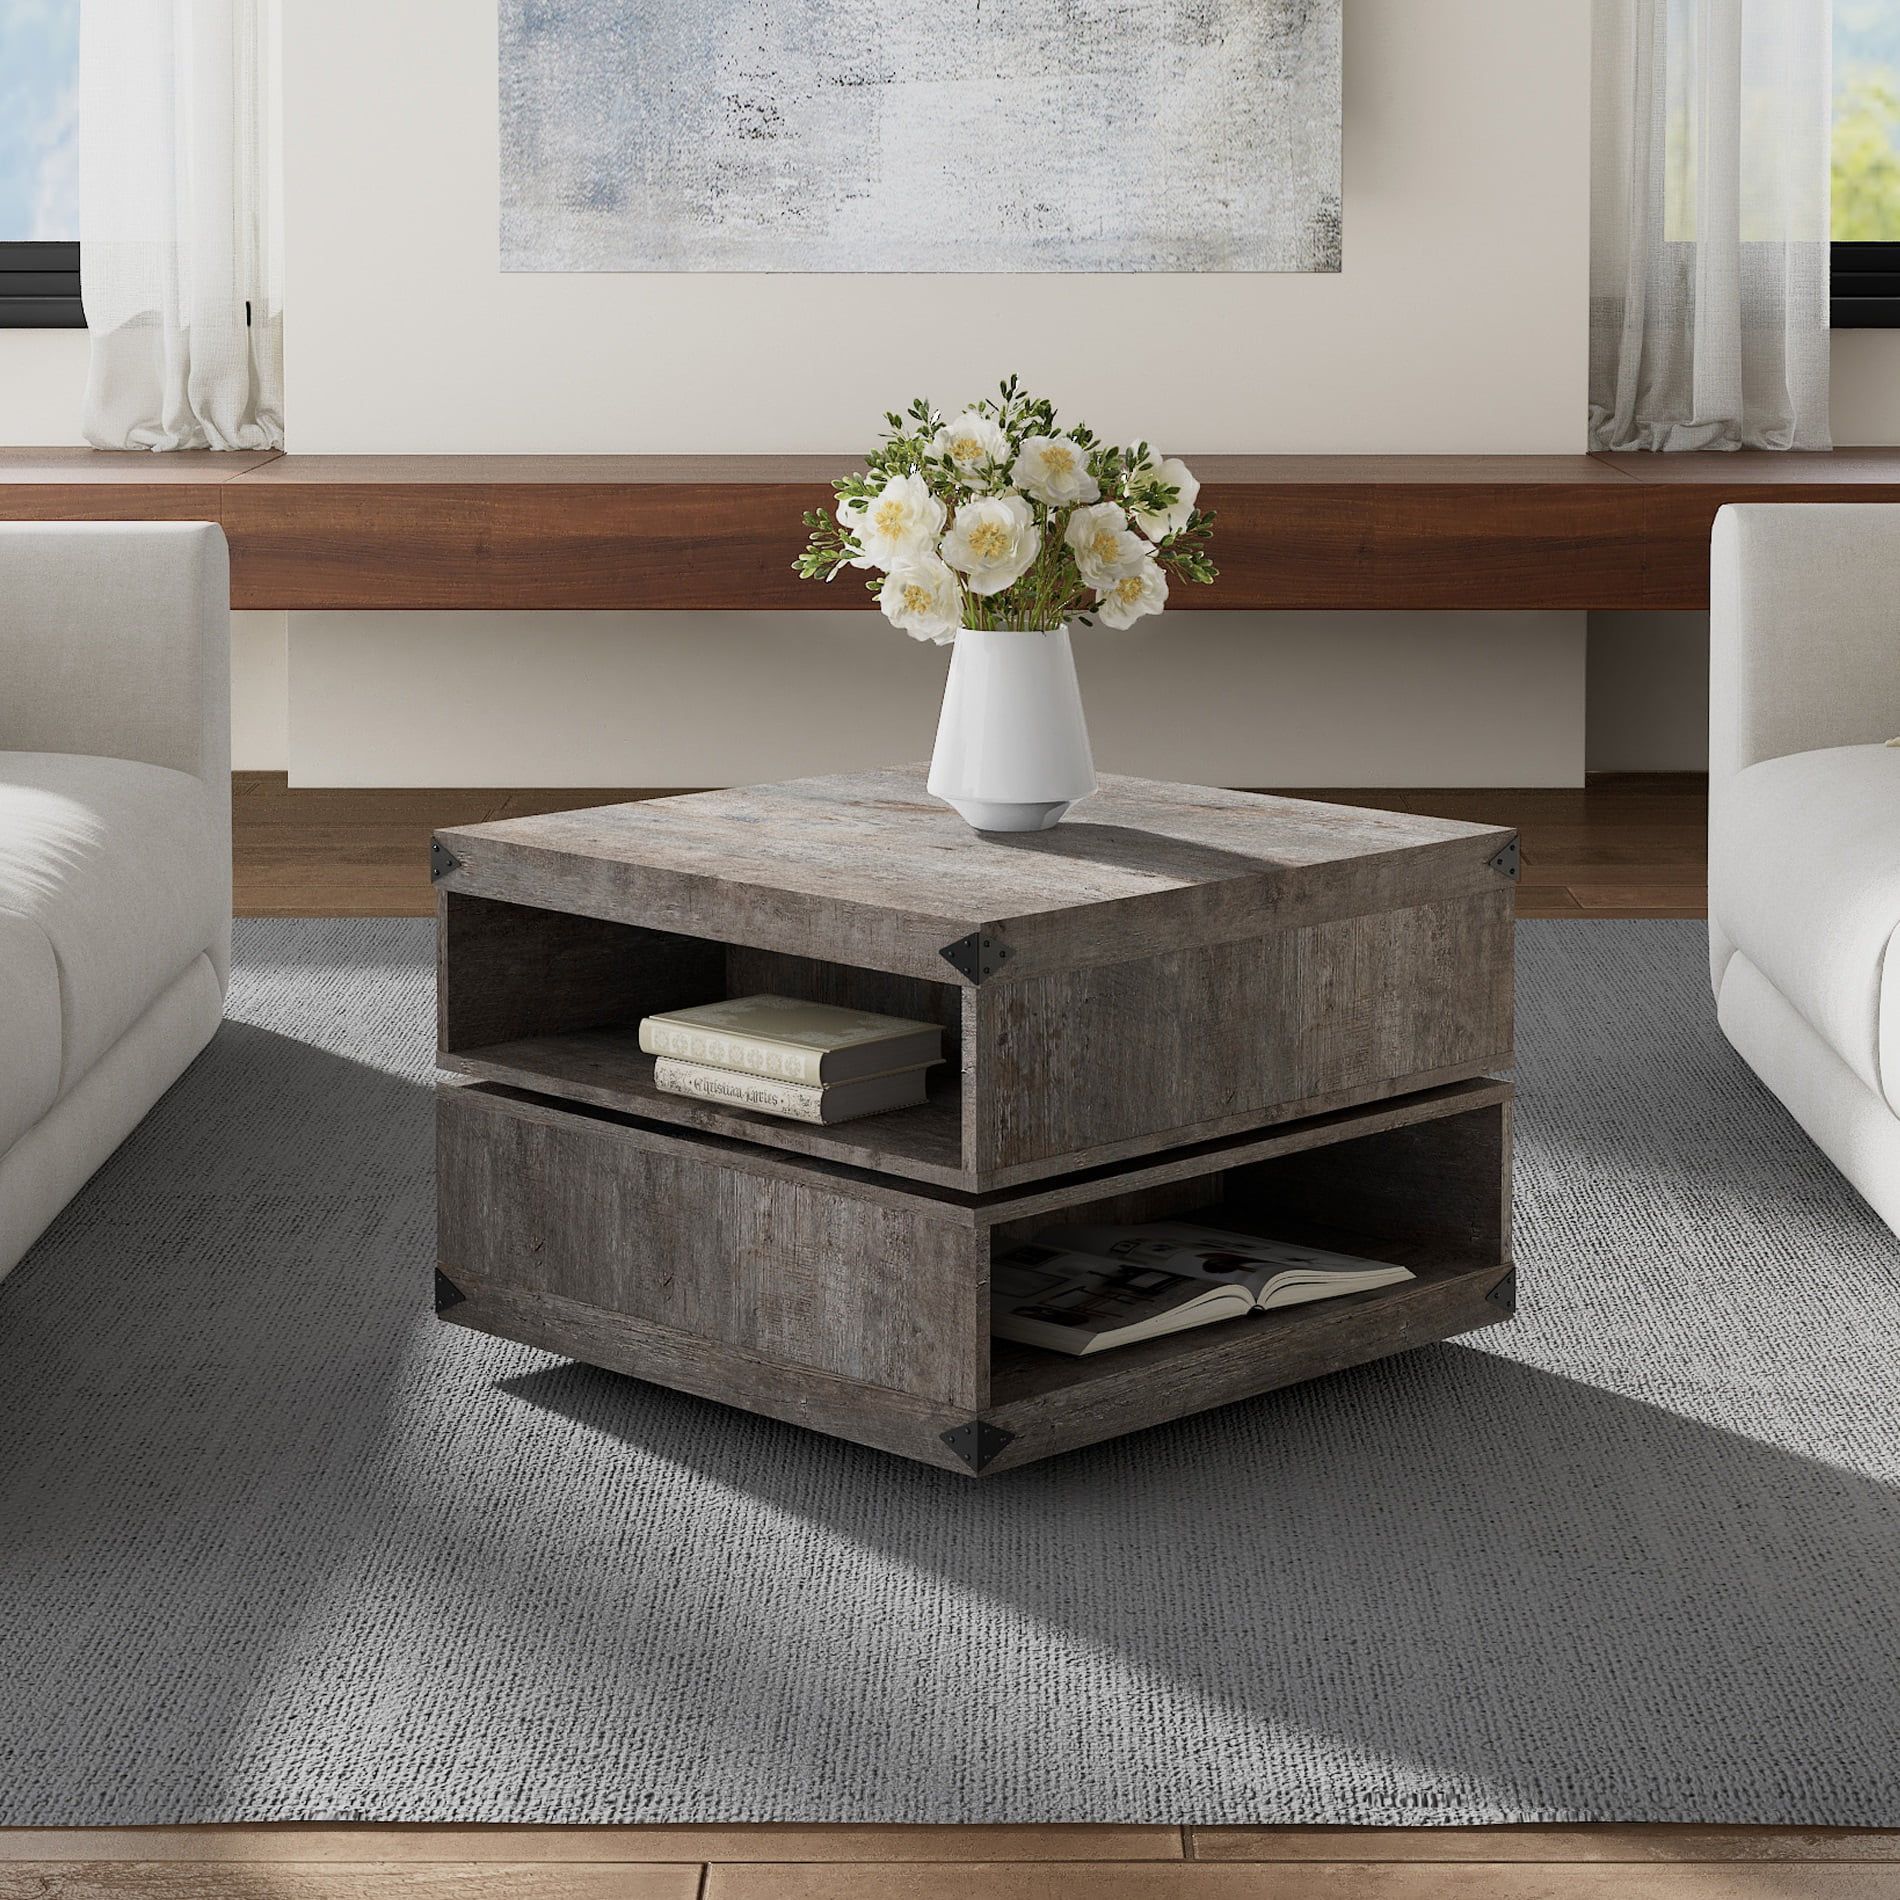 Wood Rotating Coffee Table For Living Room,rustic Gray – Walmart In Wood Rotating Tray Coffee Tables (View 13 of 15)